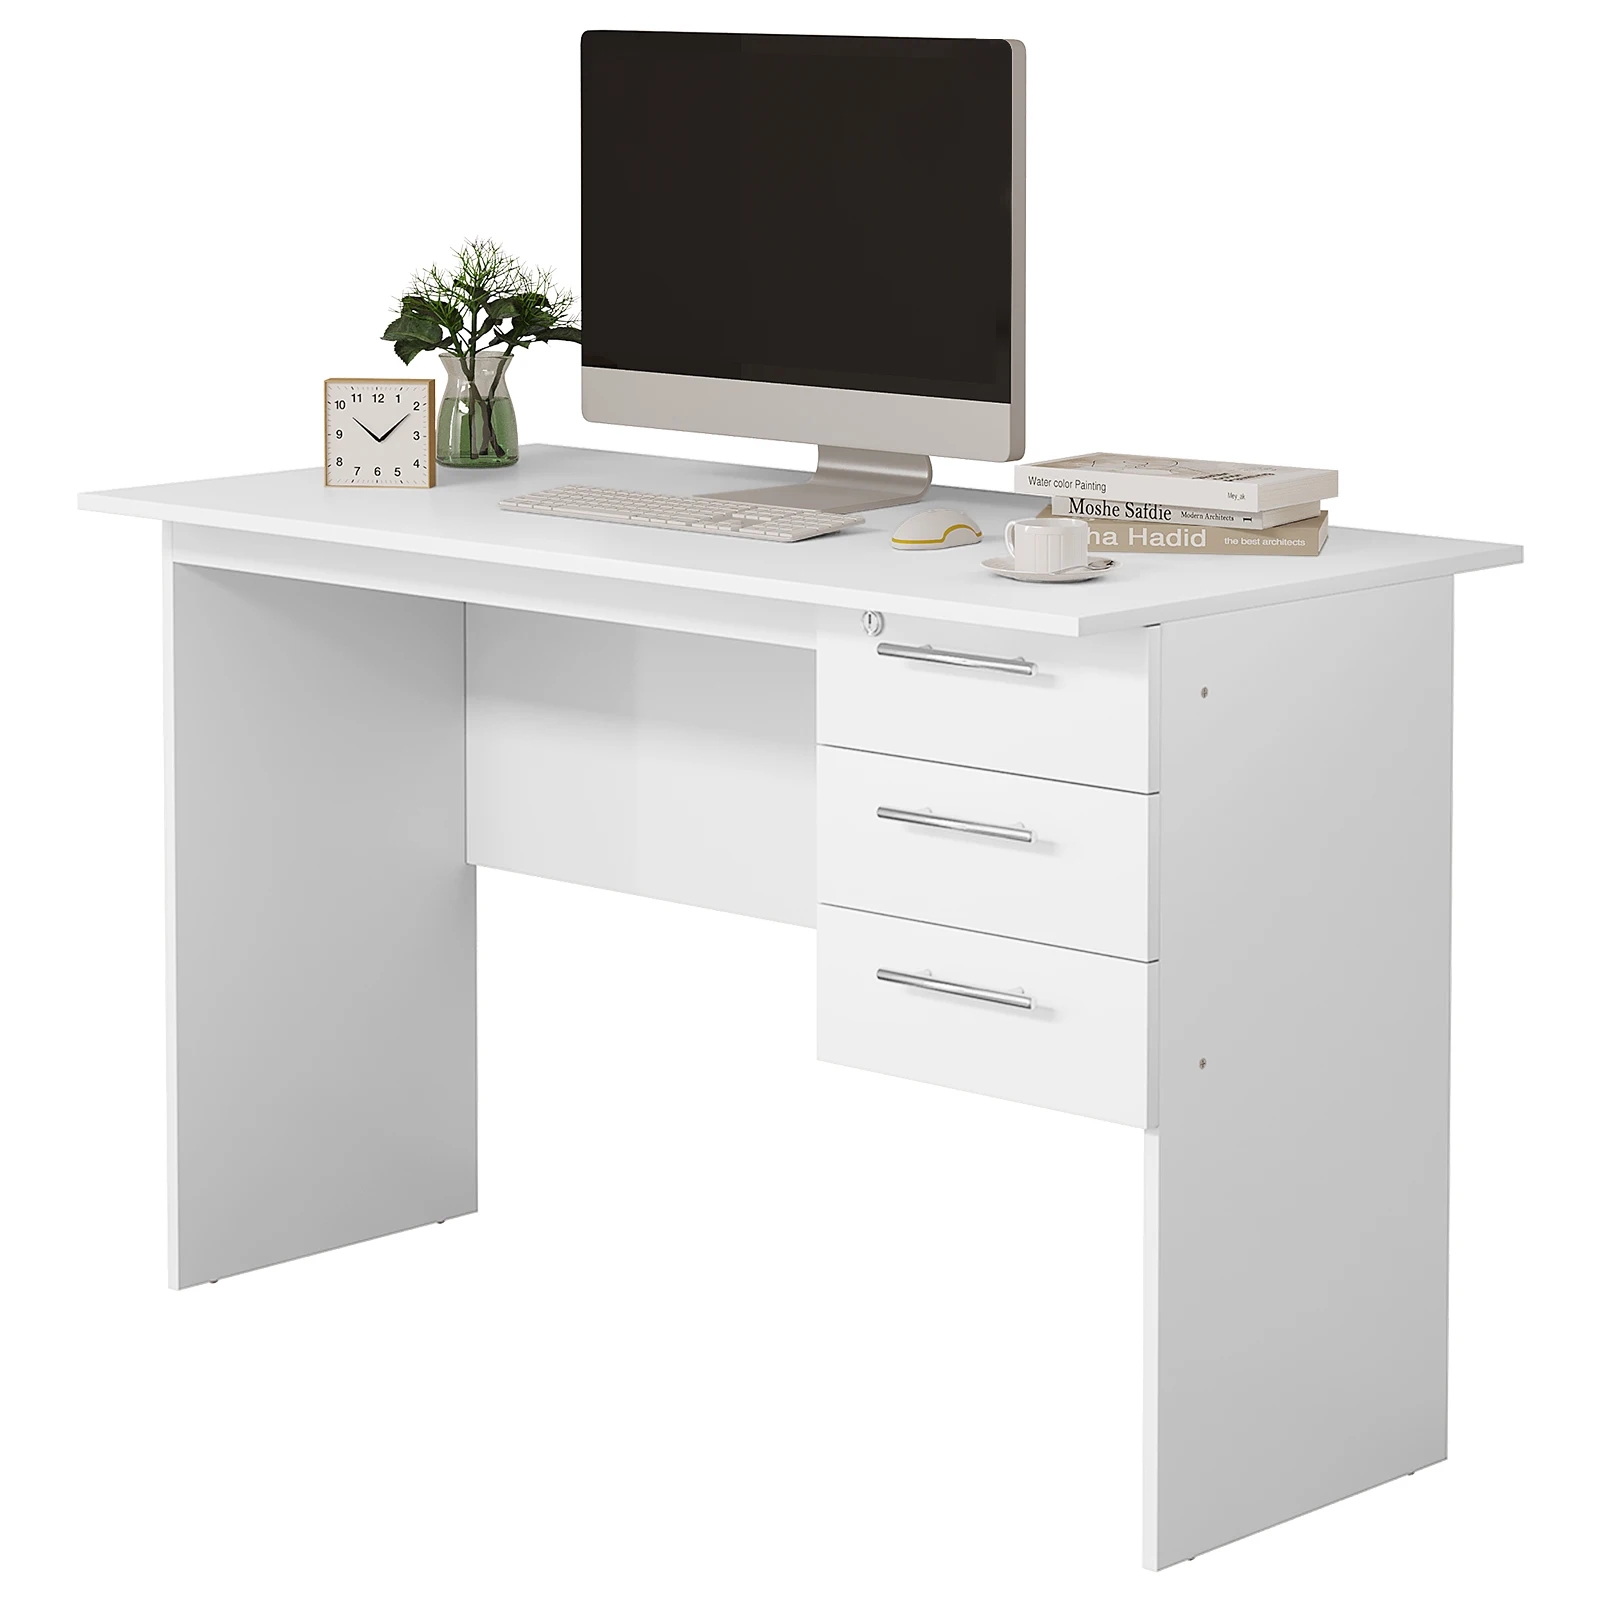 Computer Office Desk Black/ White Chipboard Table Pc Work Study Table With Drawers Lock